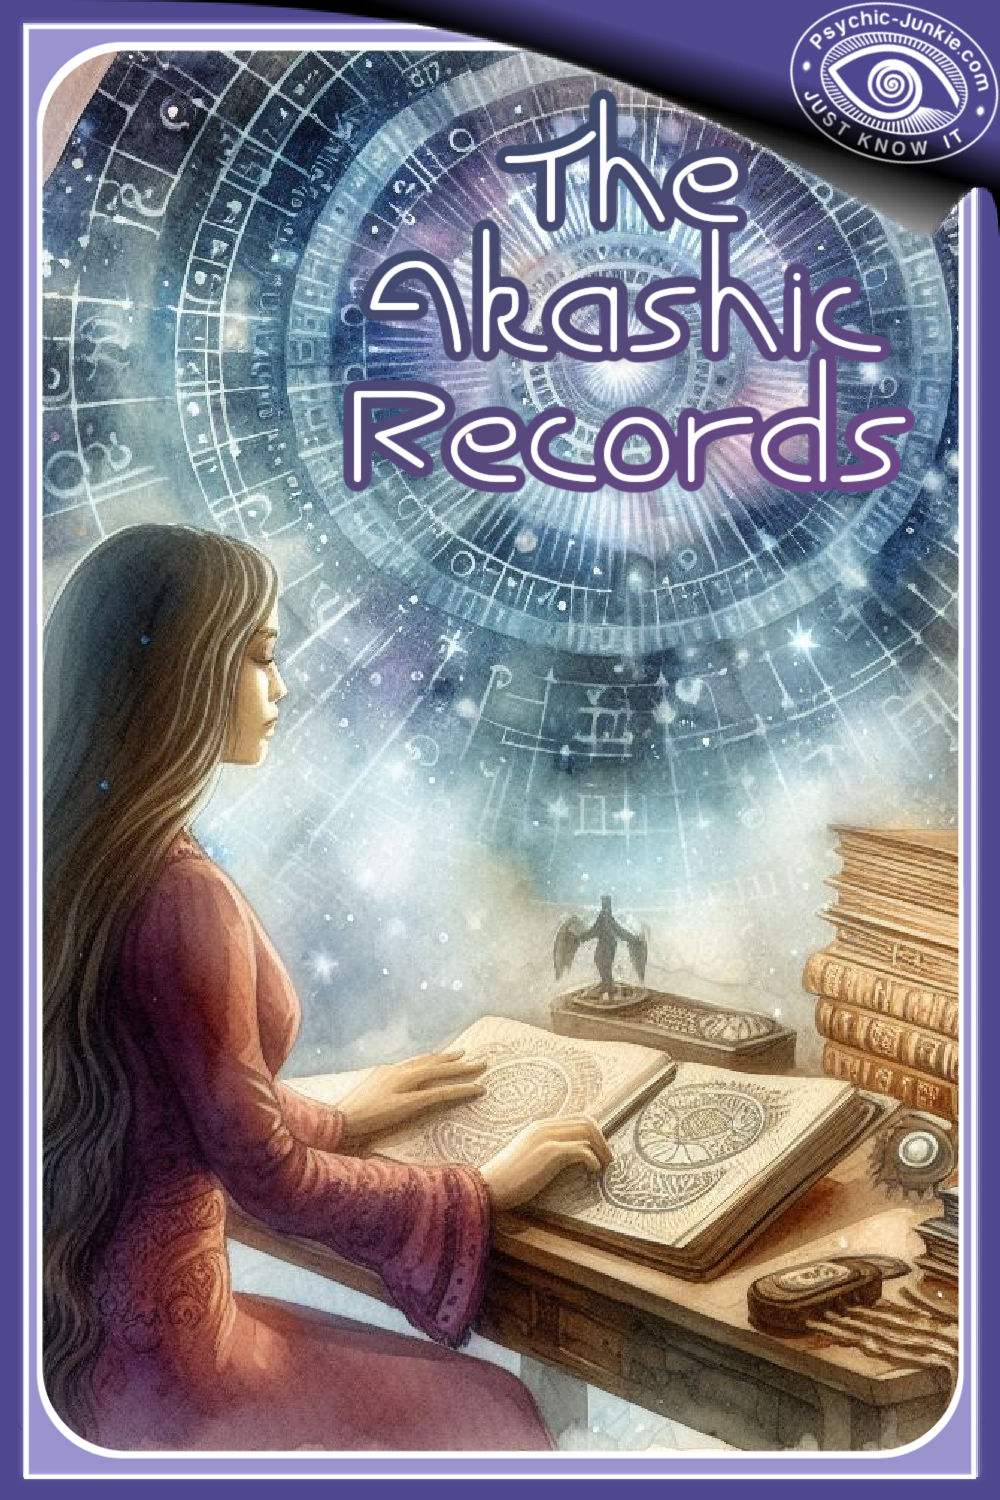 Are The Akashic Records Real?